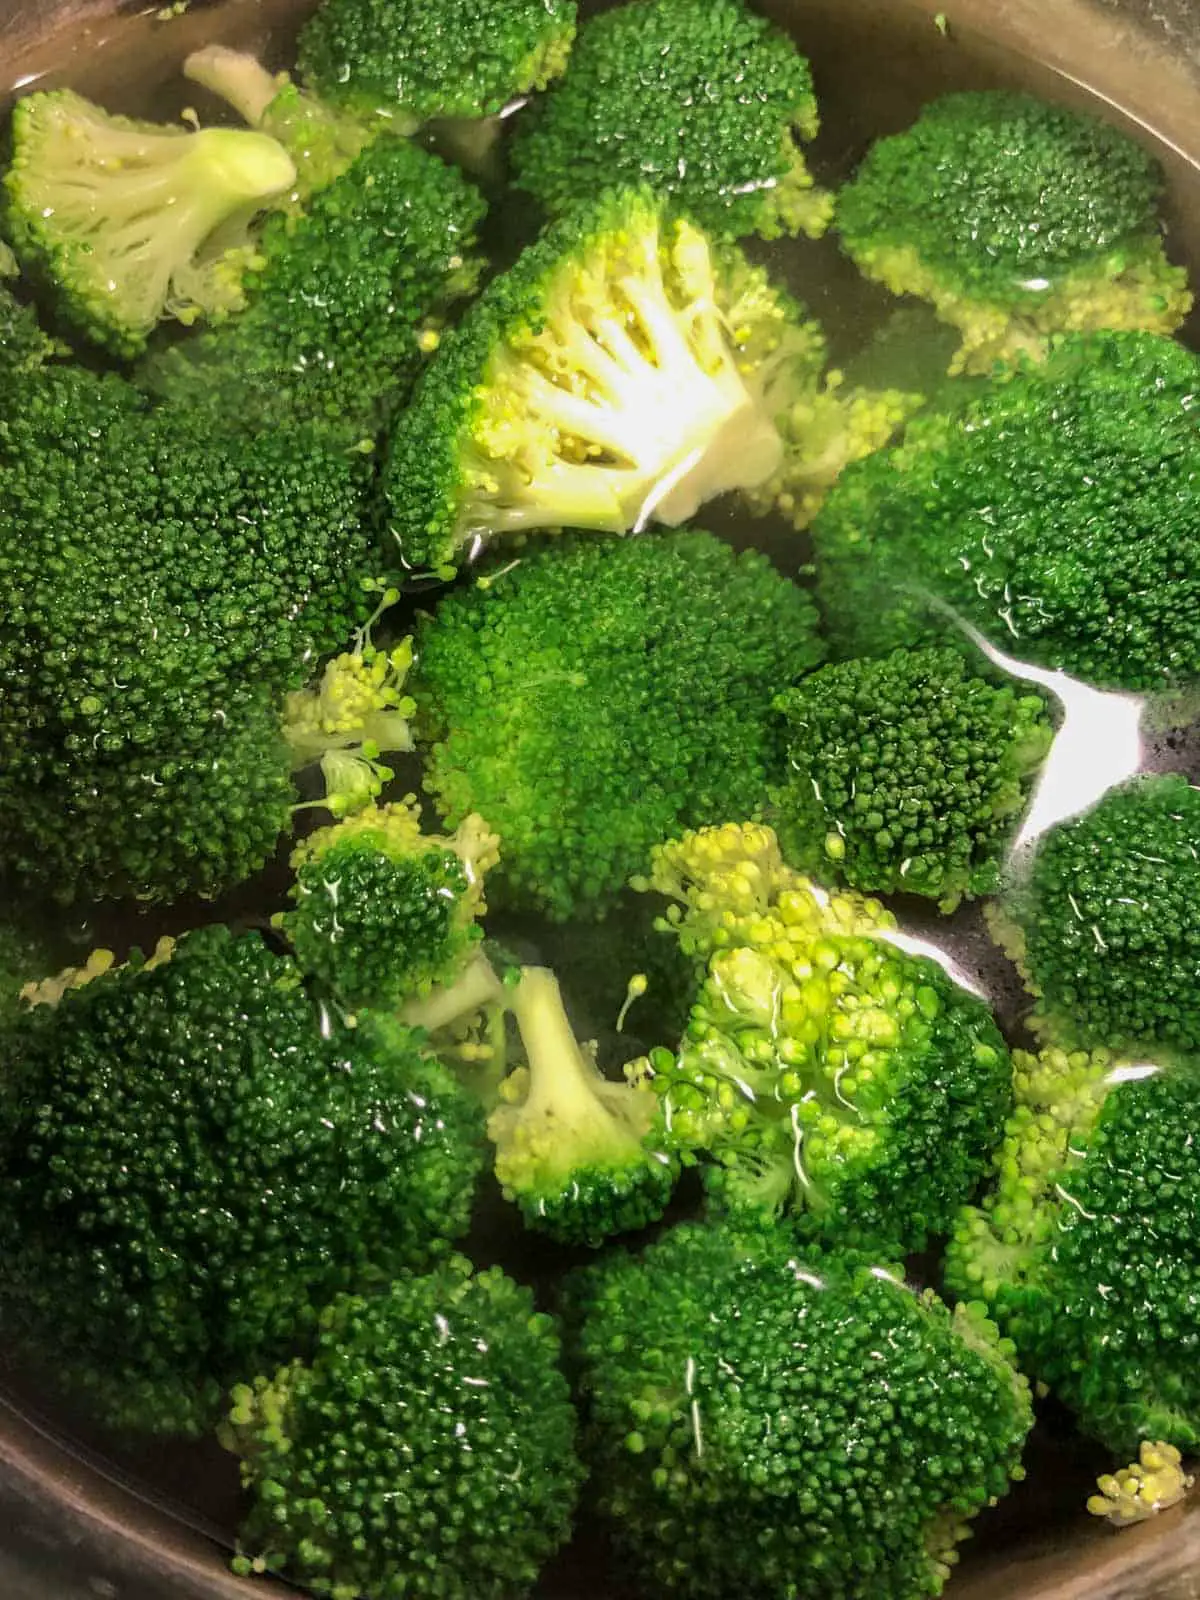 Broccoli florets in water in a large pot.